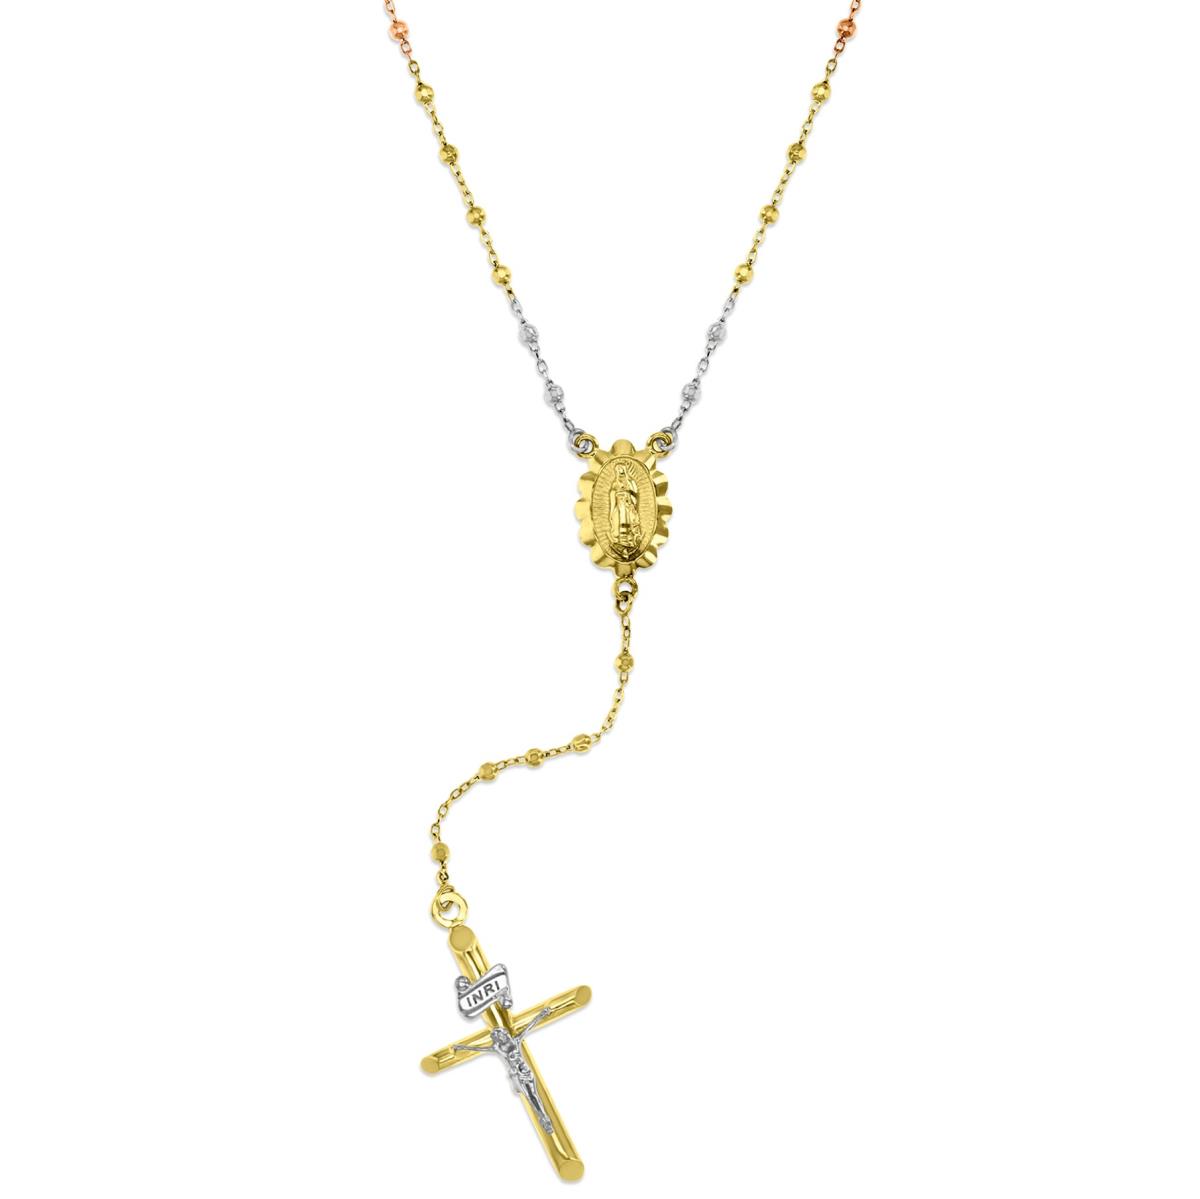 14K Gold Tricolor 1.80MM Diamond Cut Beads Rosary 24" Necklace